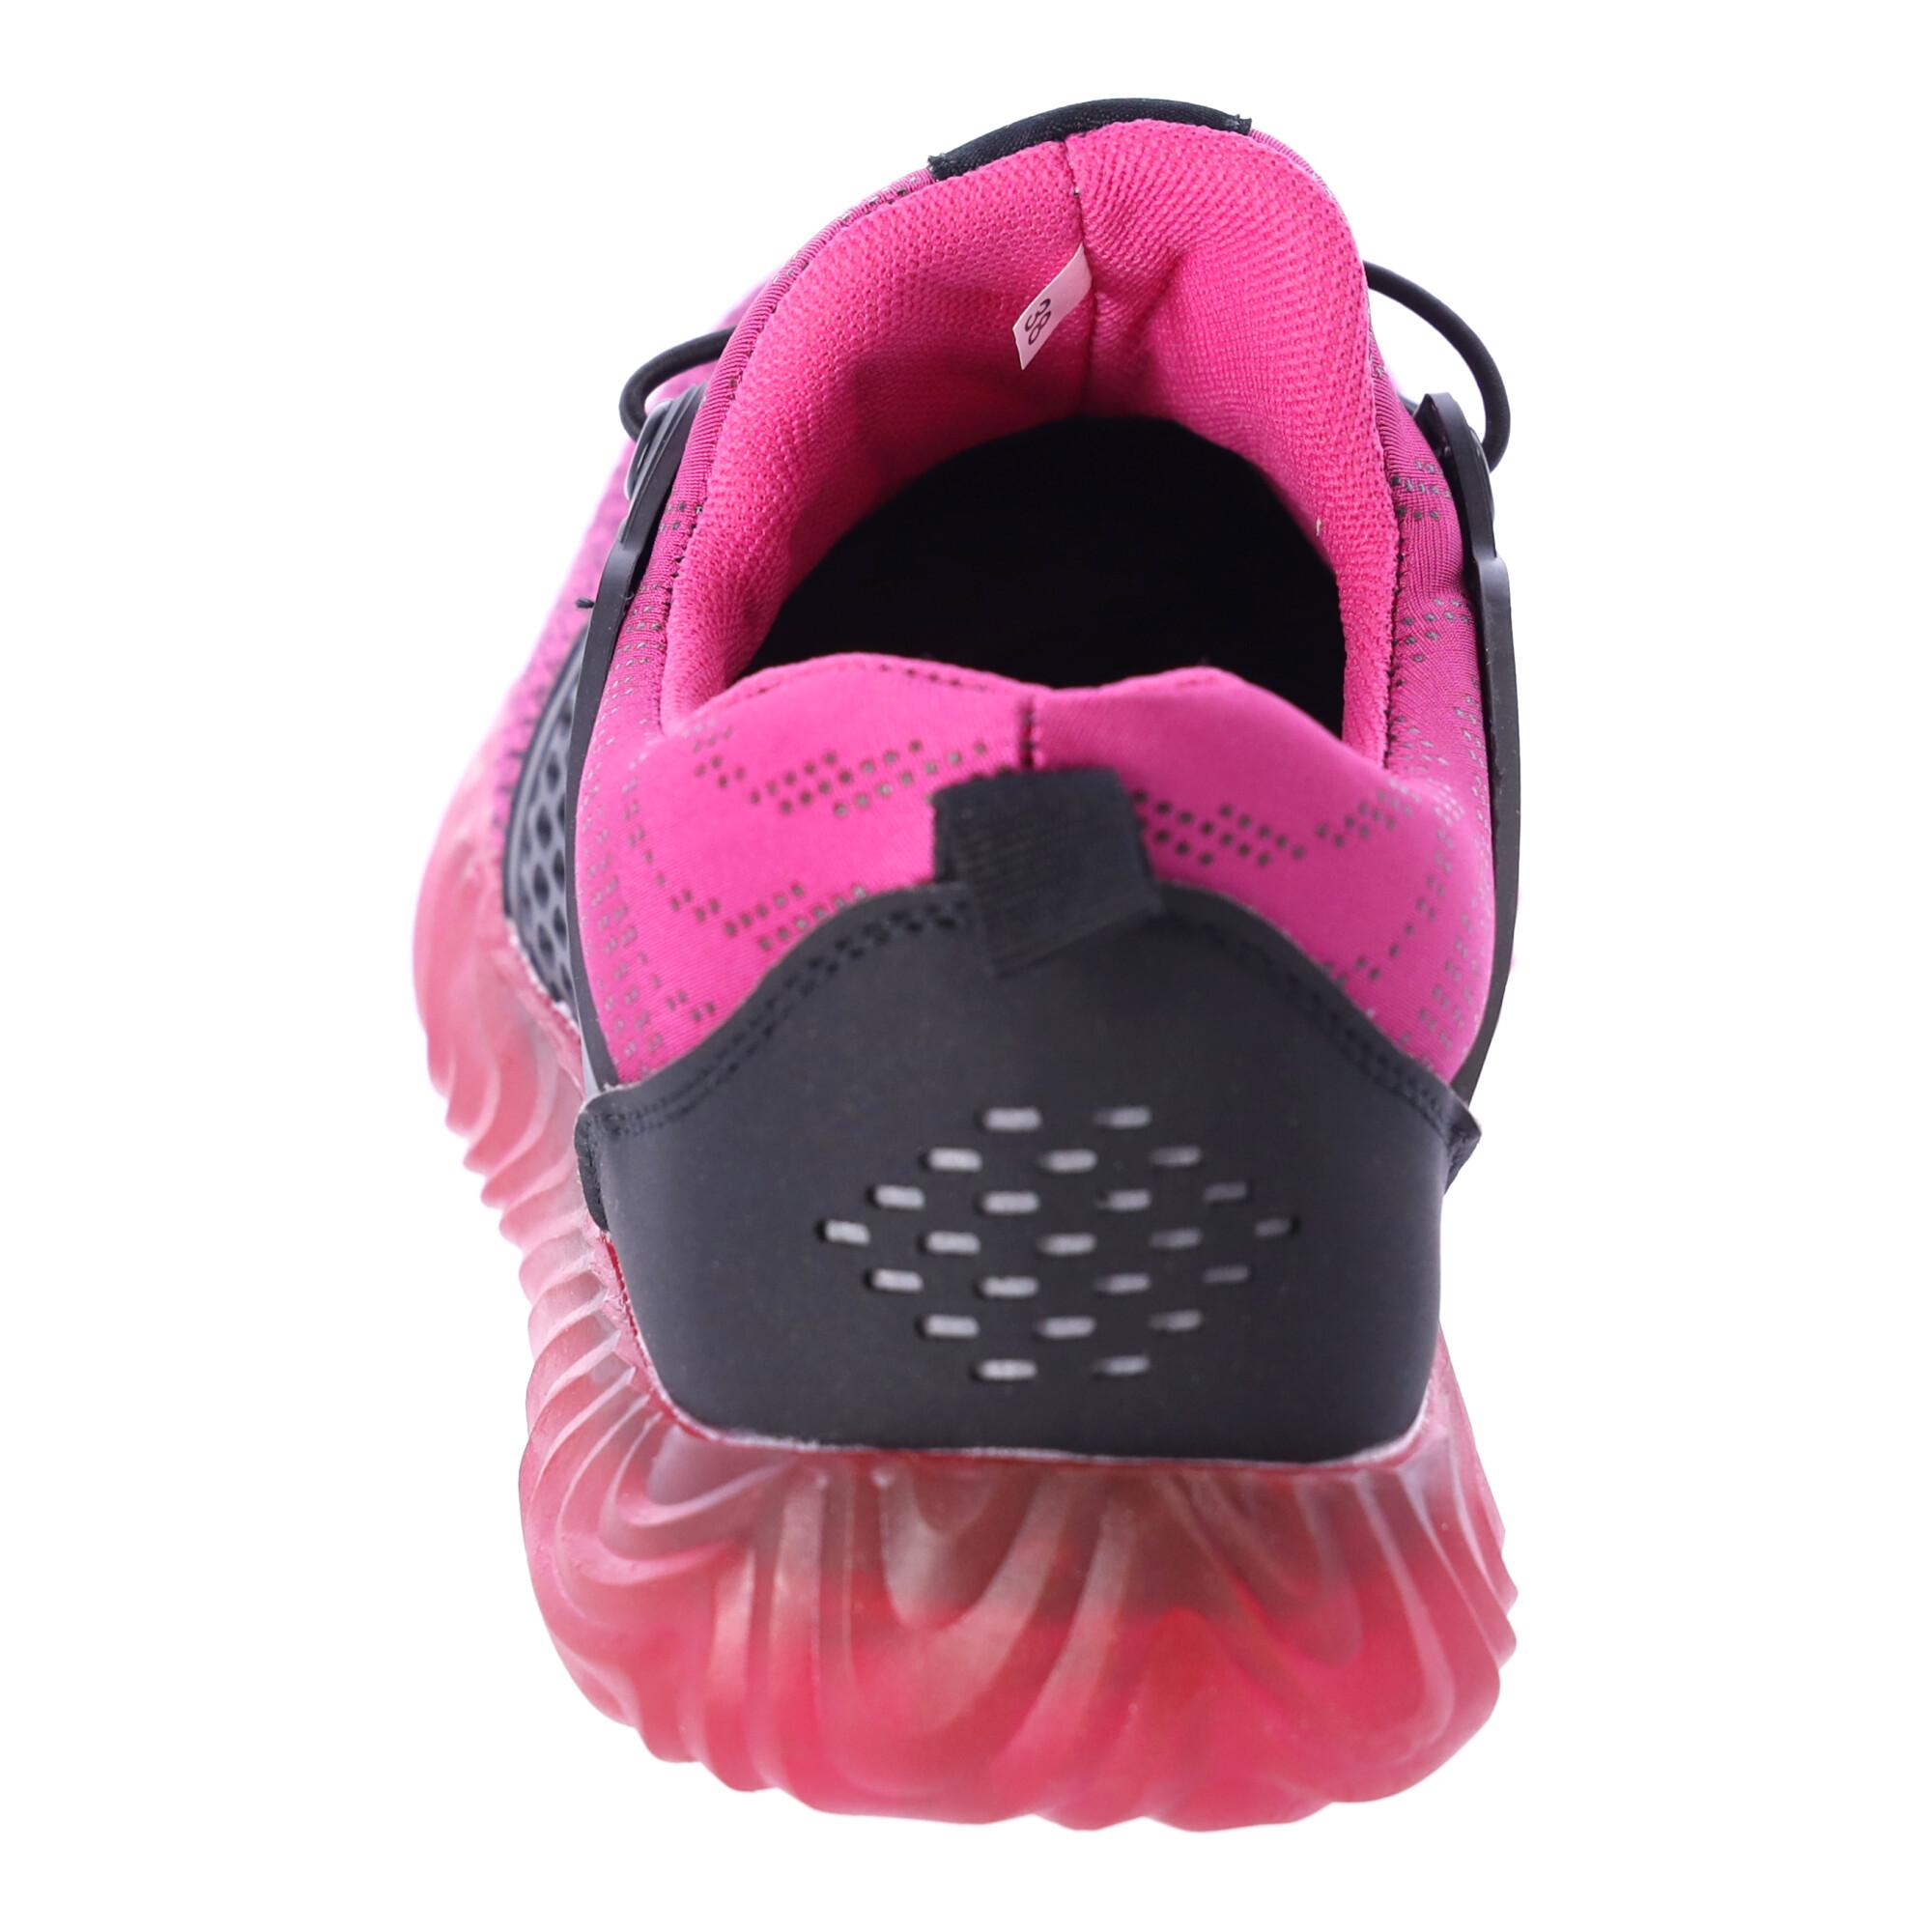 Work safety shoes "40" - pink